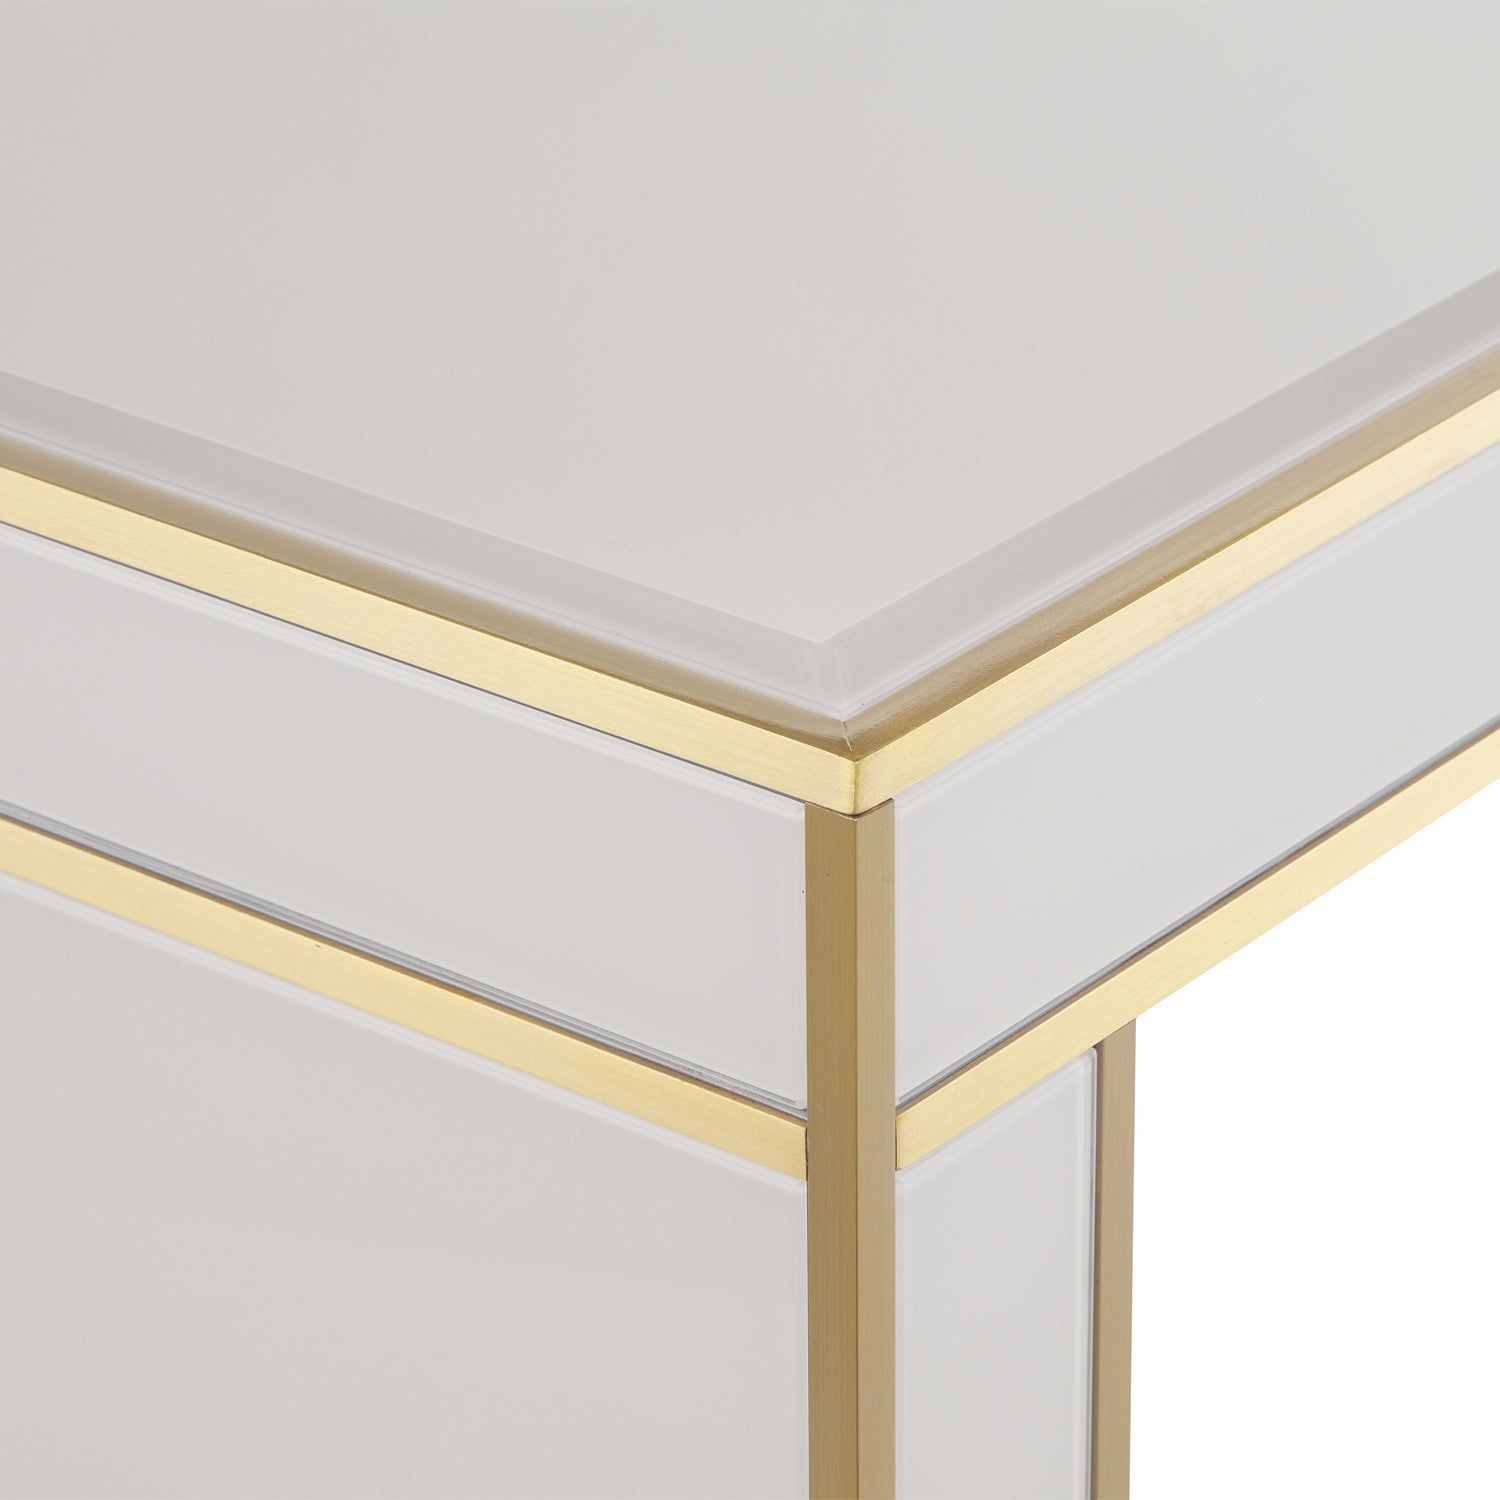 Console Table from the Arden collection in Ivory/Satin Brass finish